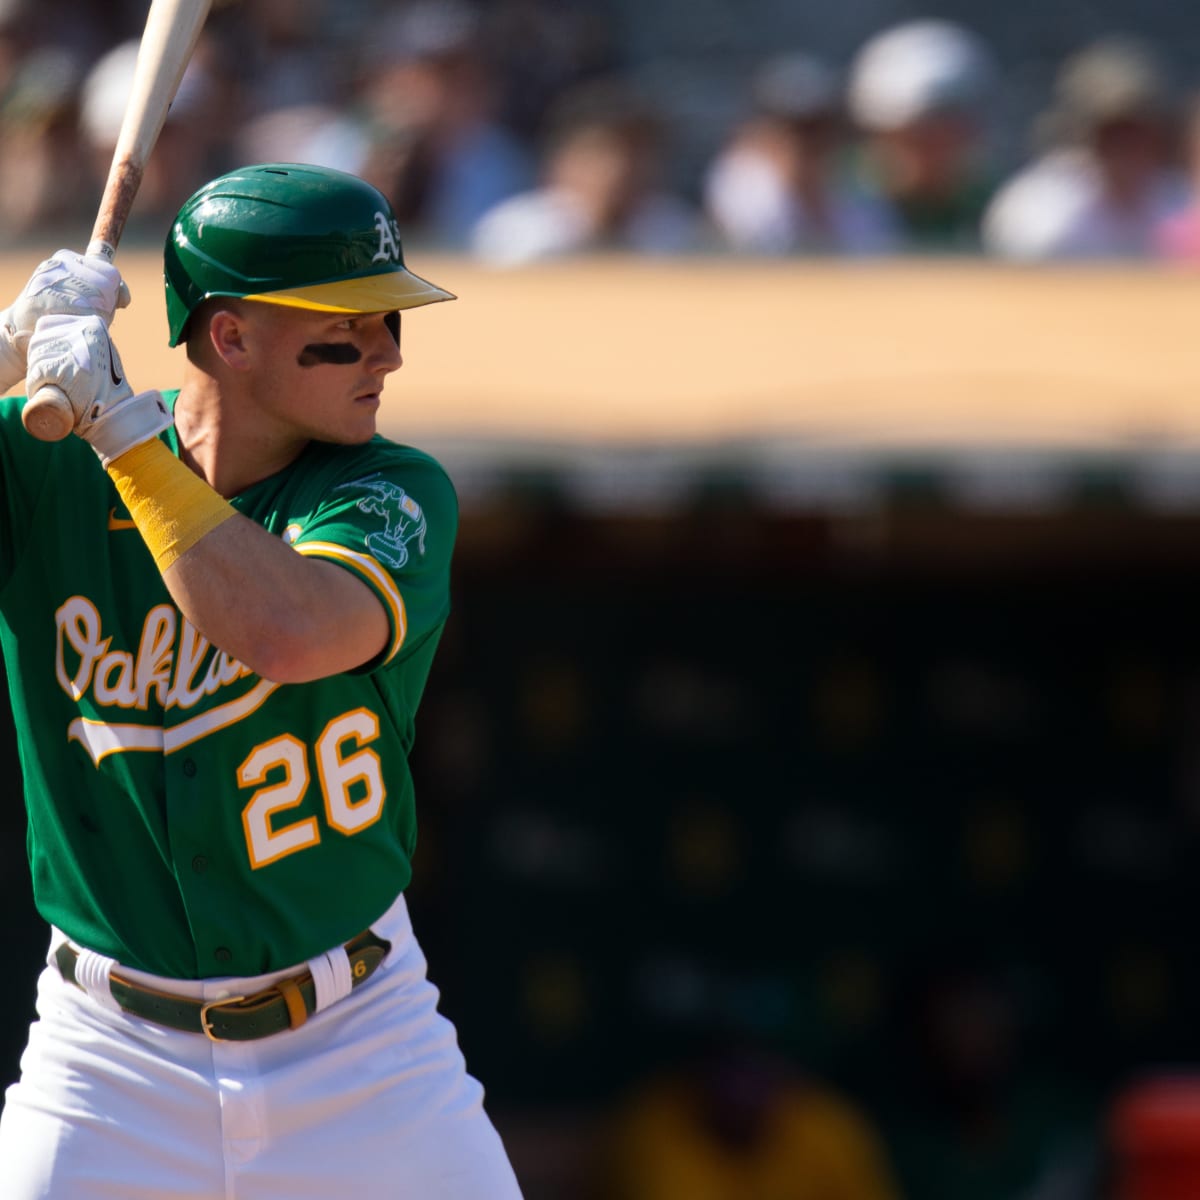 Matt Chapman of the Oakland Athletics fields during the game